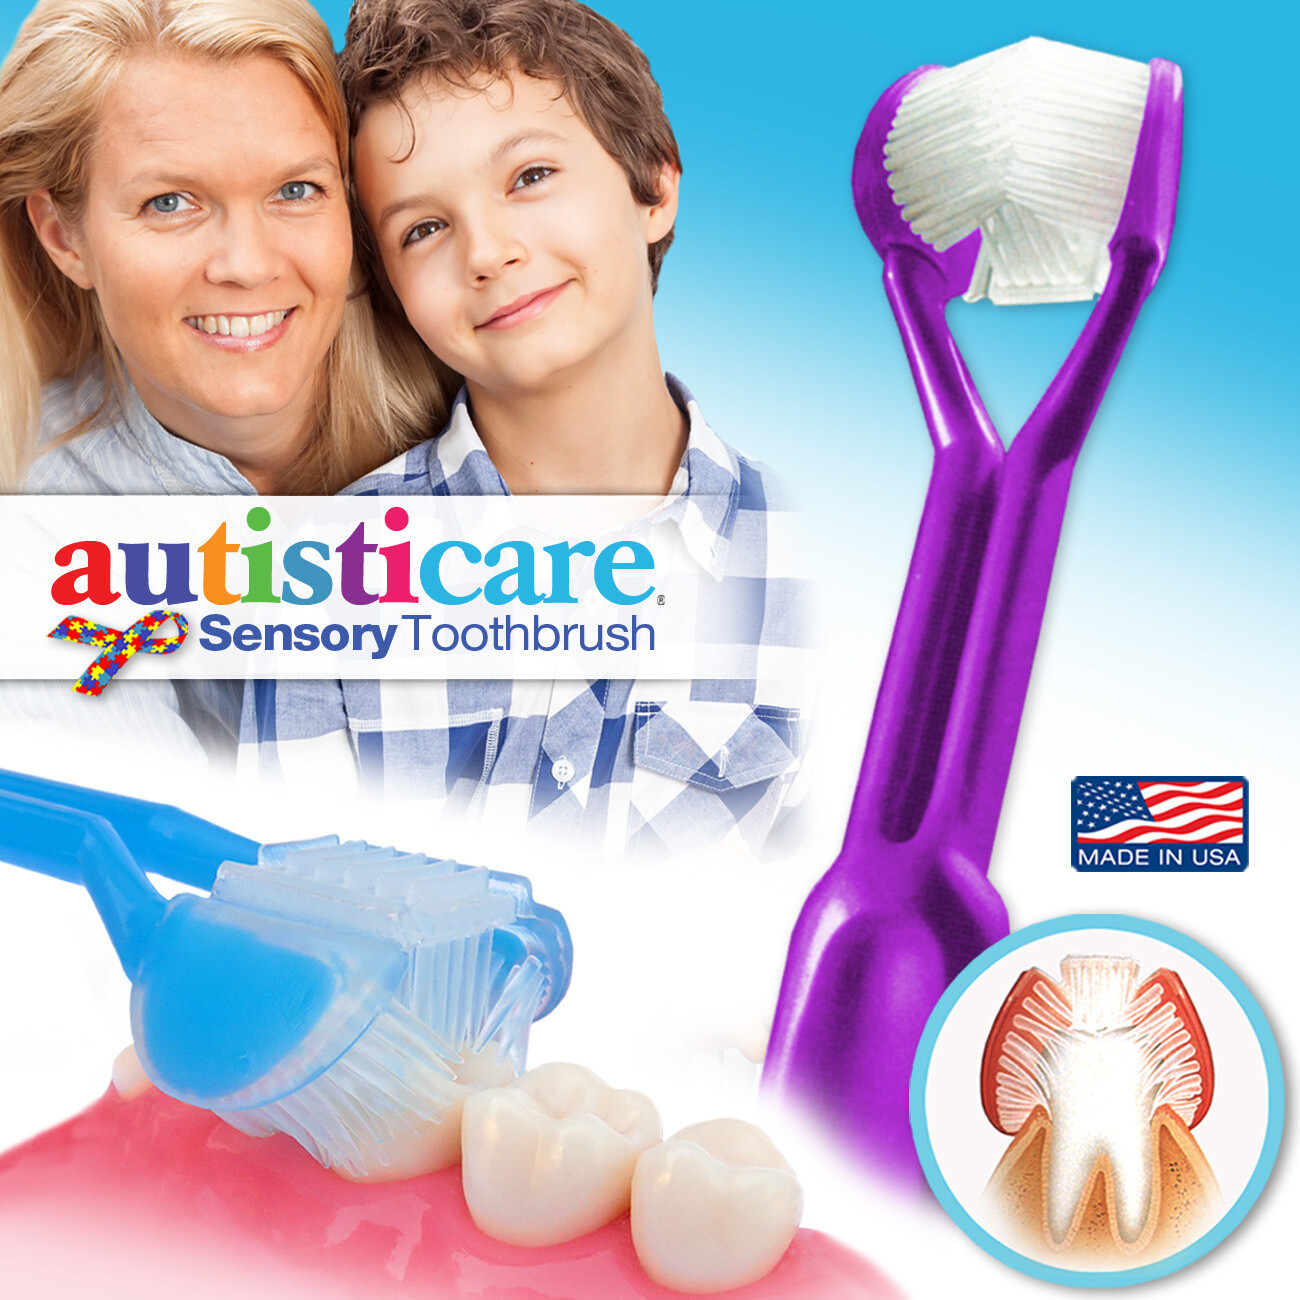 DenTrust Autisticare | The Only Child-Safe 3-Sided Toothbrush | Made in USA | Fast, Easy & Clinically Proven | Special Needs Autism Autistic Asperger Therapy Caregiver Tactile Sensory Calming